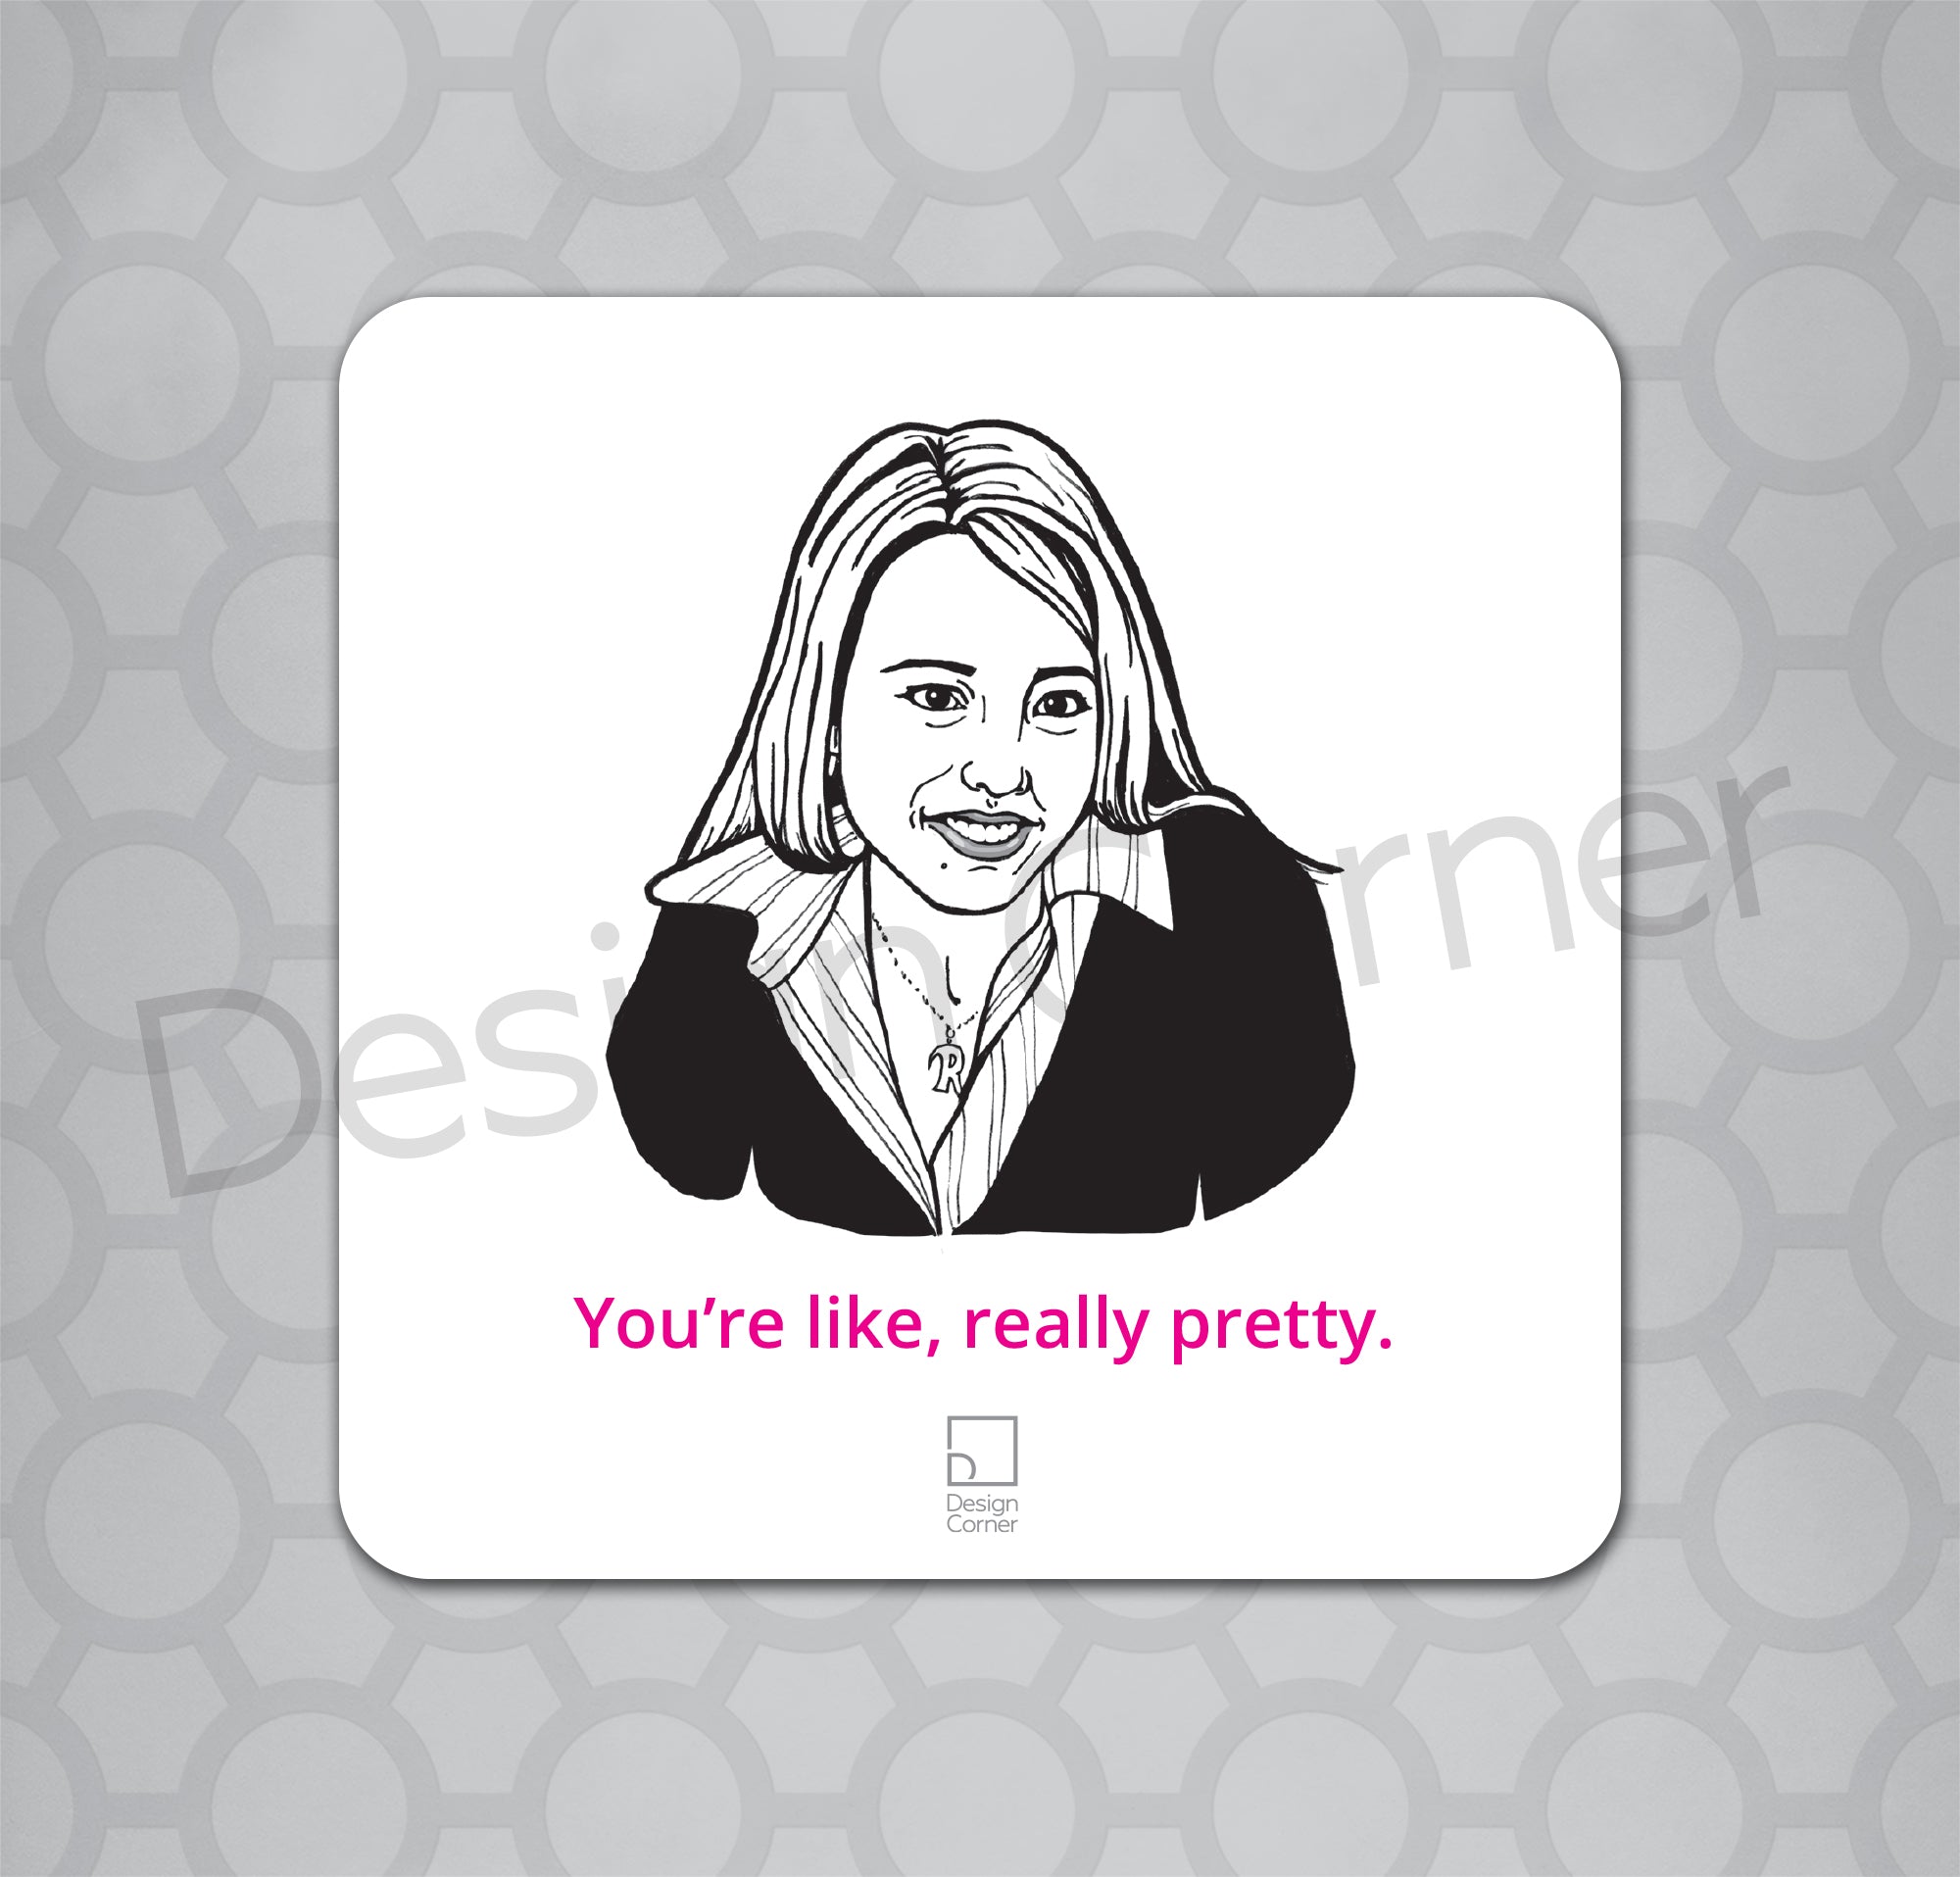 Illustration of Mean Girls Regina George on a coaster with caption "You're like, really pretty."